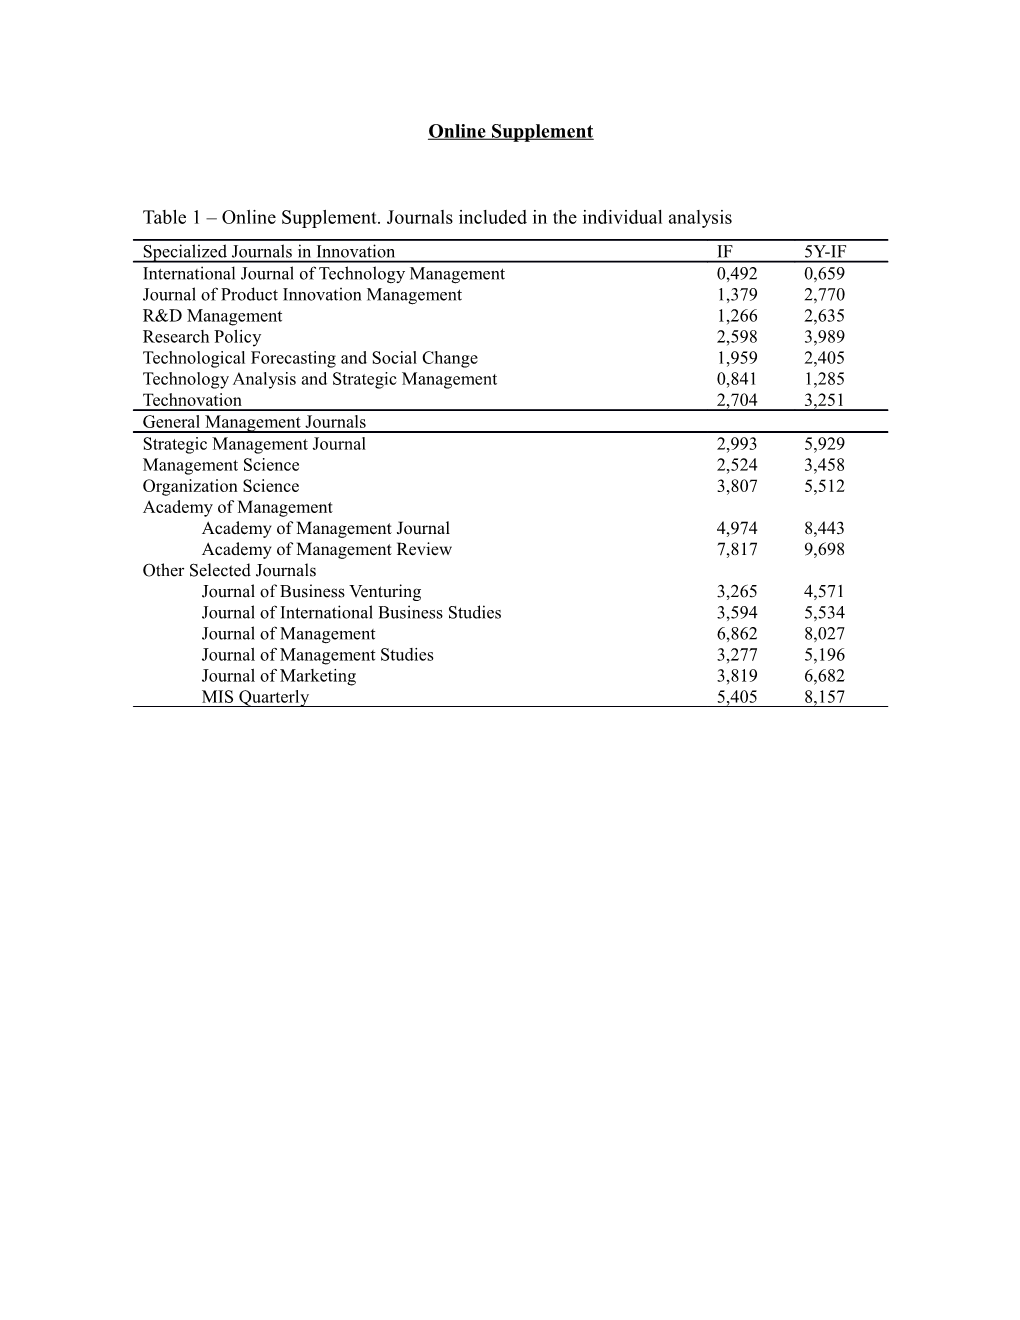 Table 1 Online Supplement. Journals Included in the Individual Analysis